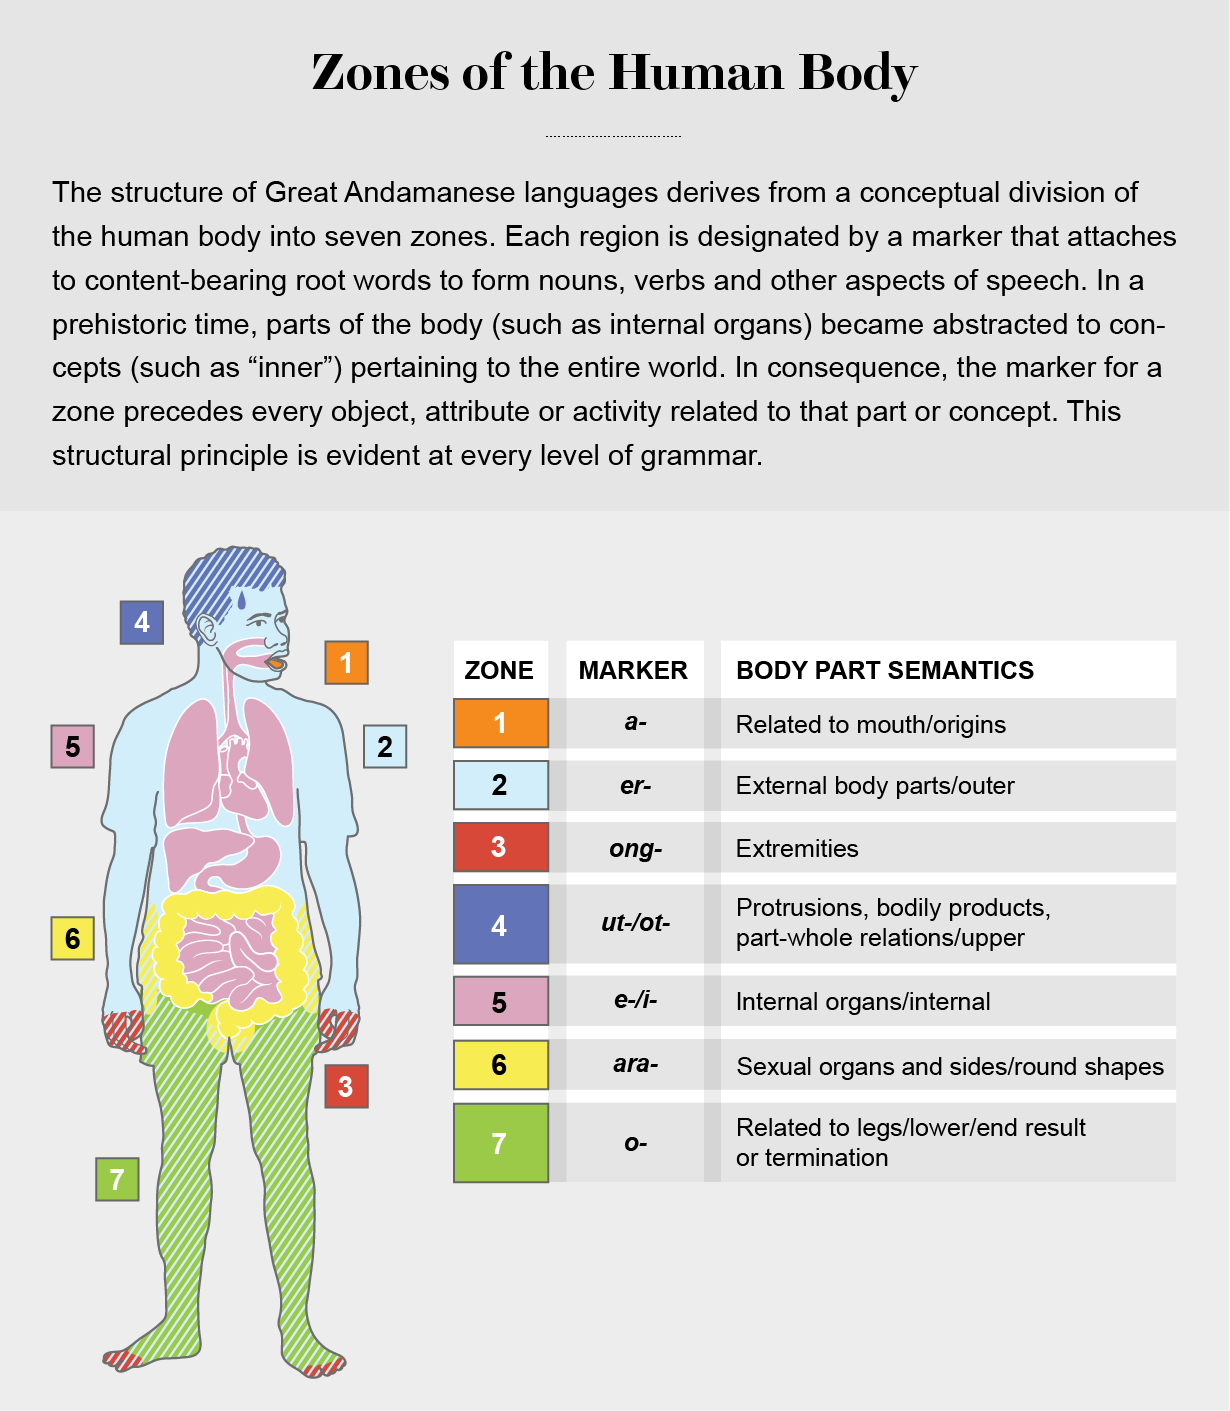 Color-coded table and diagram show how seven Great Andamanese language markers correspond to zones of the human body.